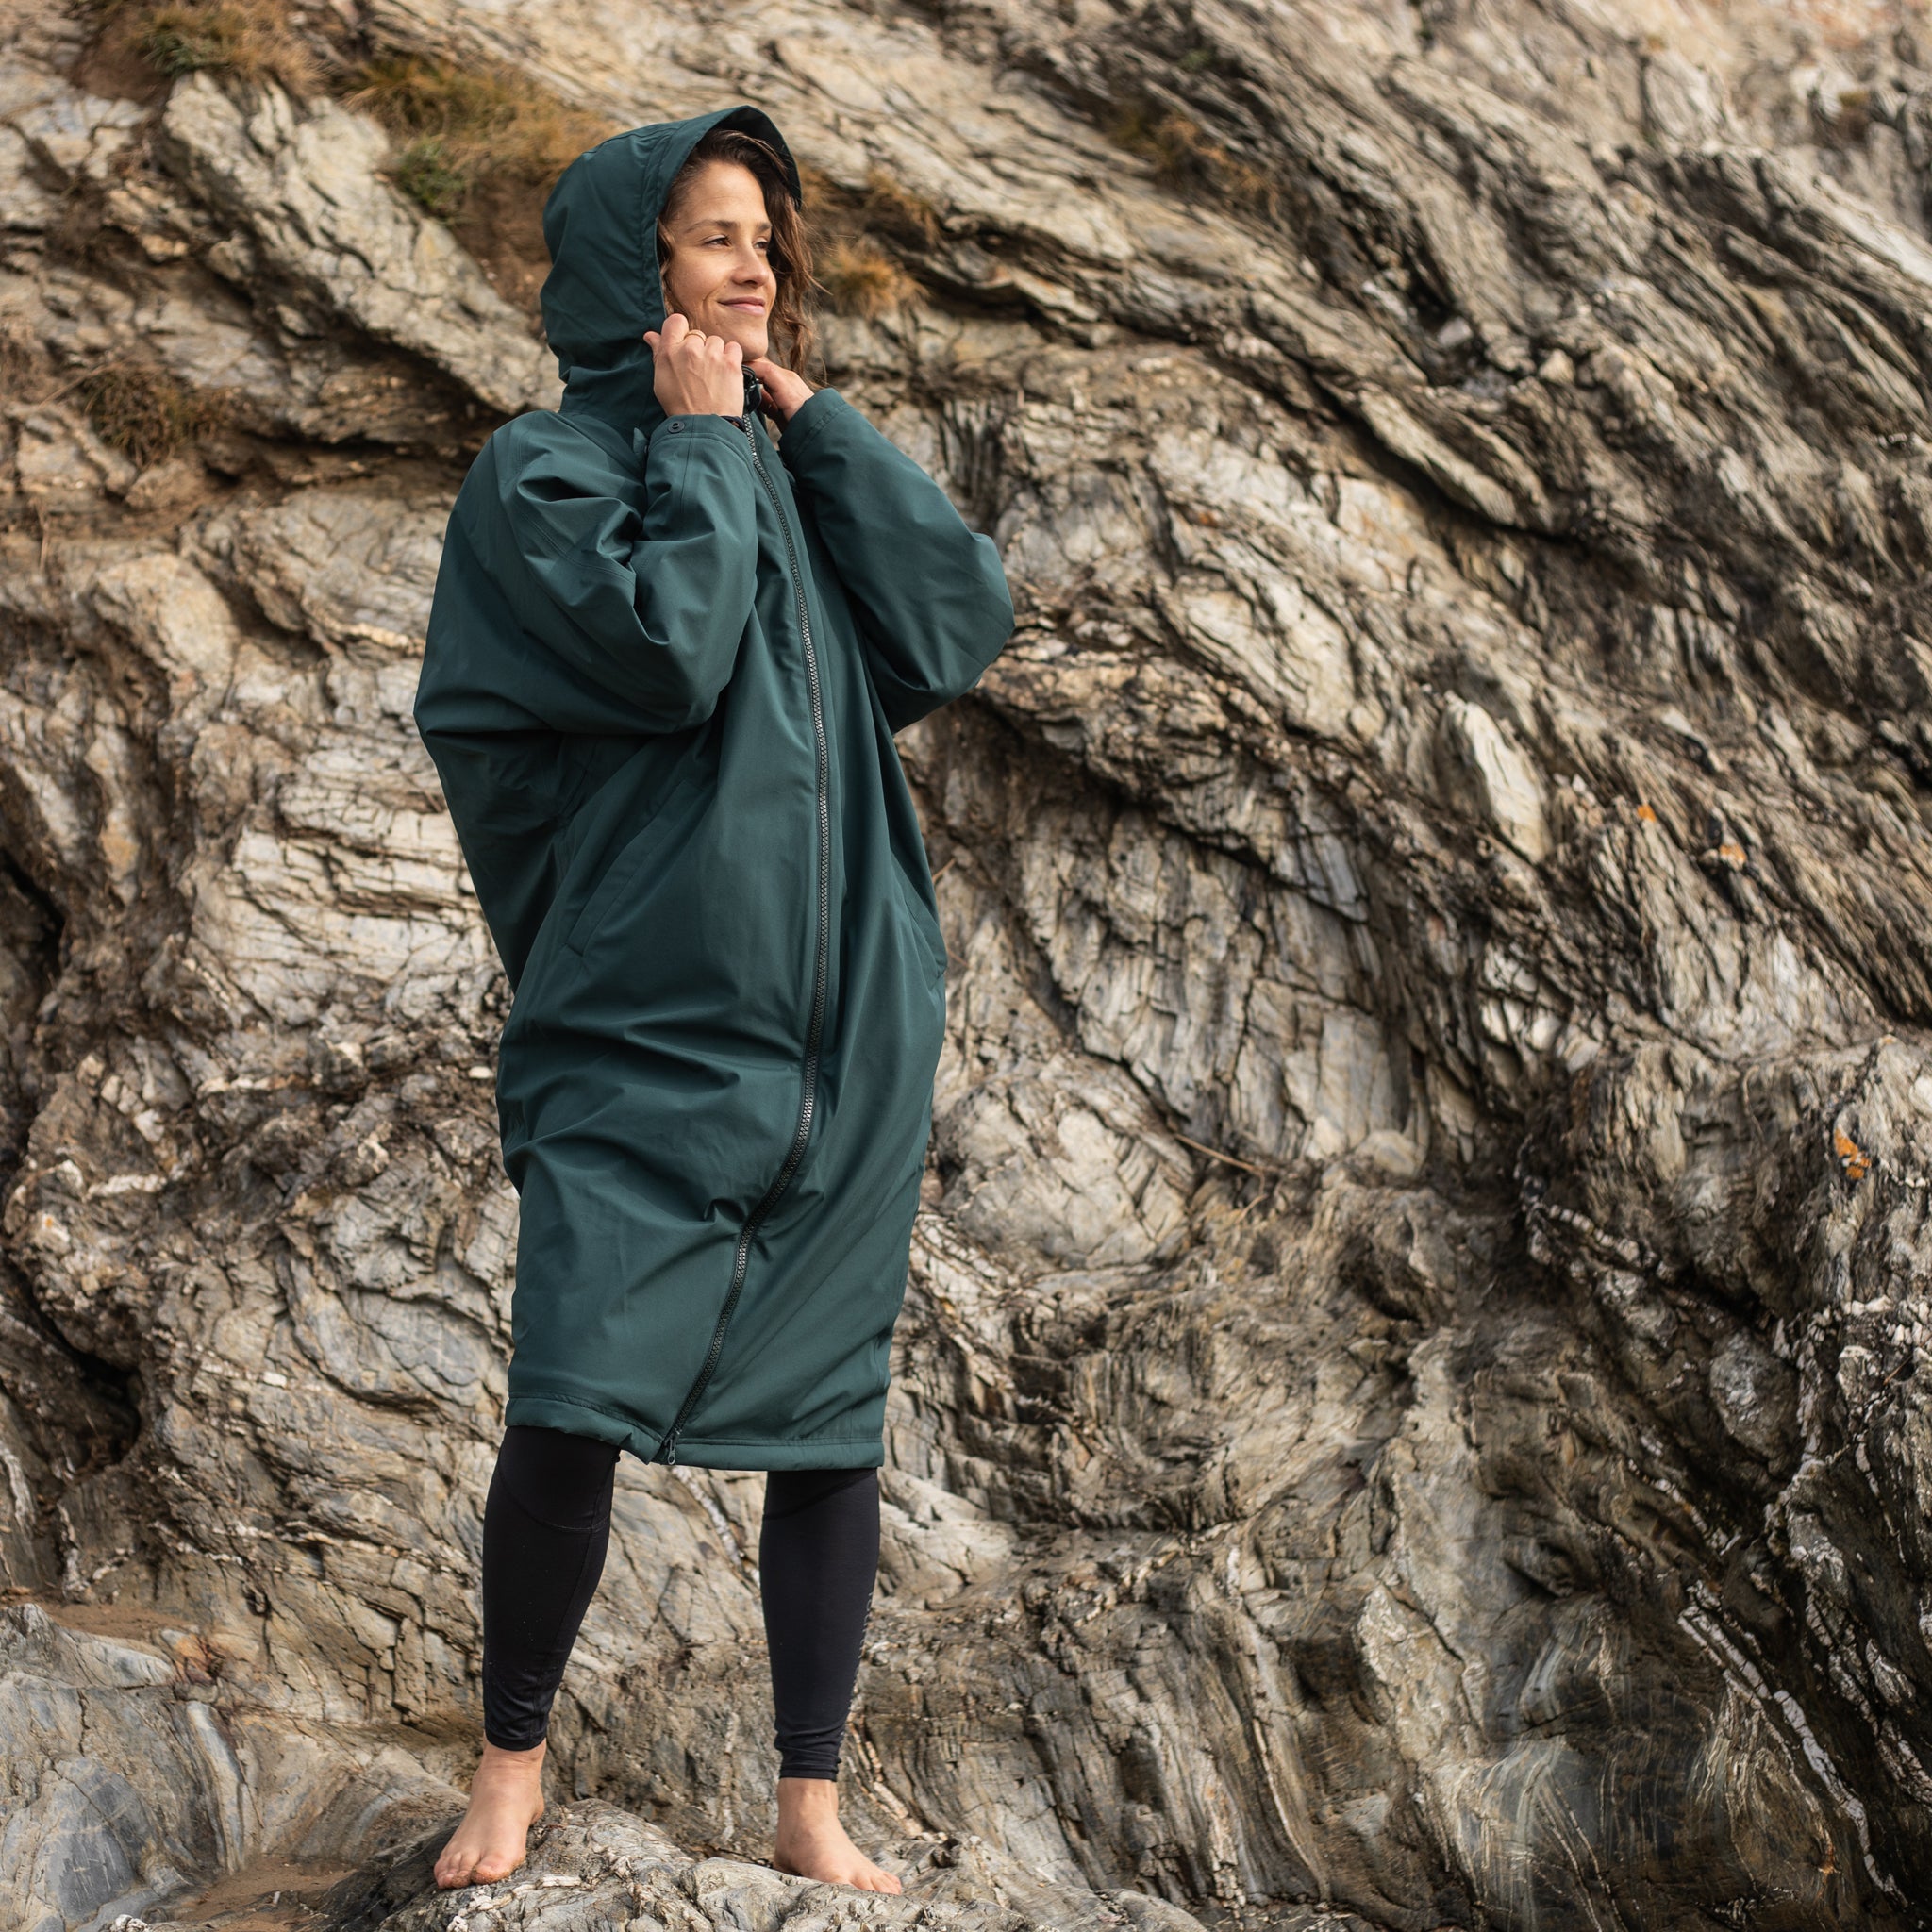 Fourth Element Tidal Change Robe made from Recycled Polyester - Green | On the rocks